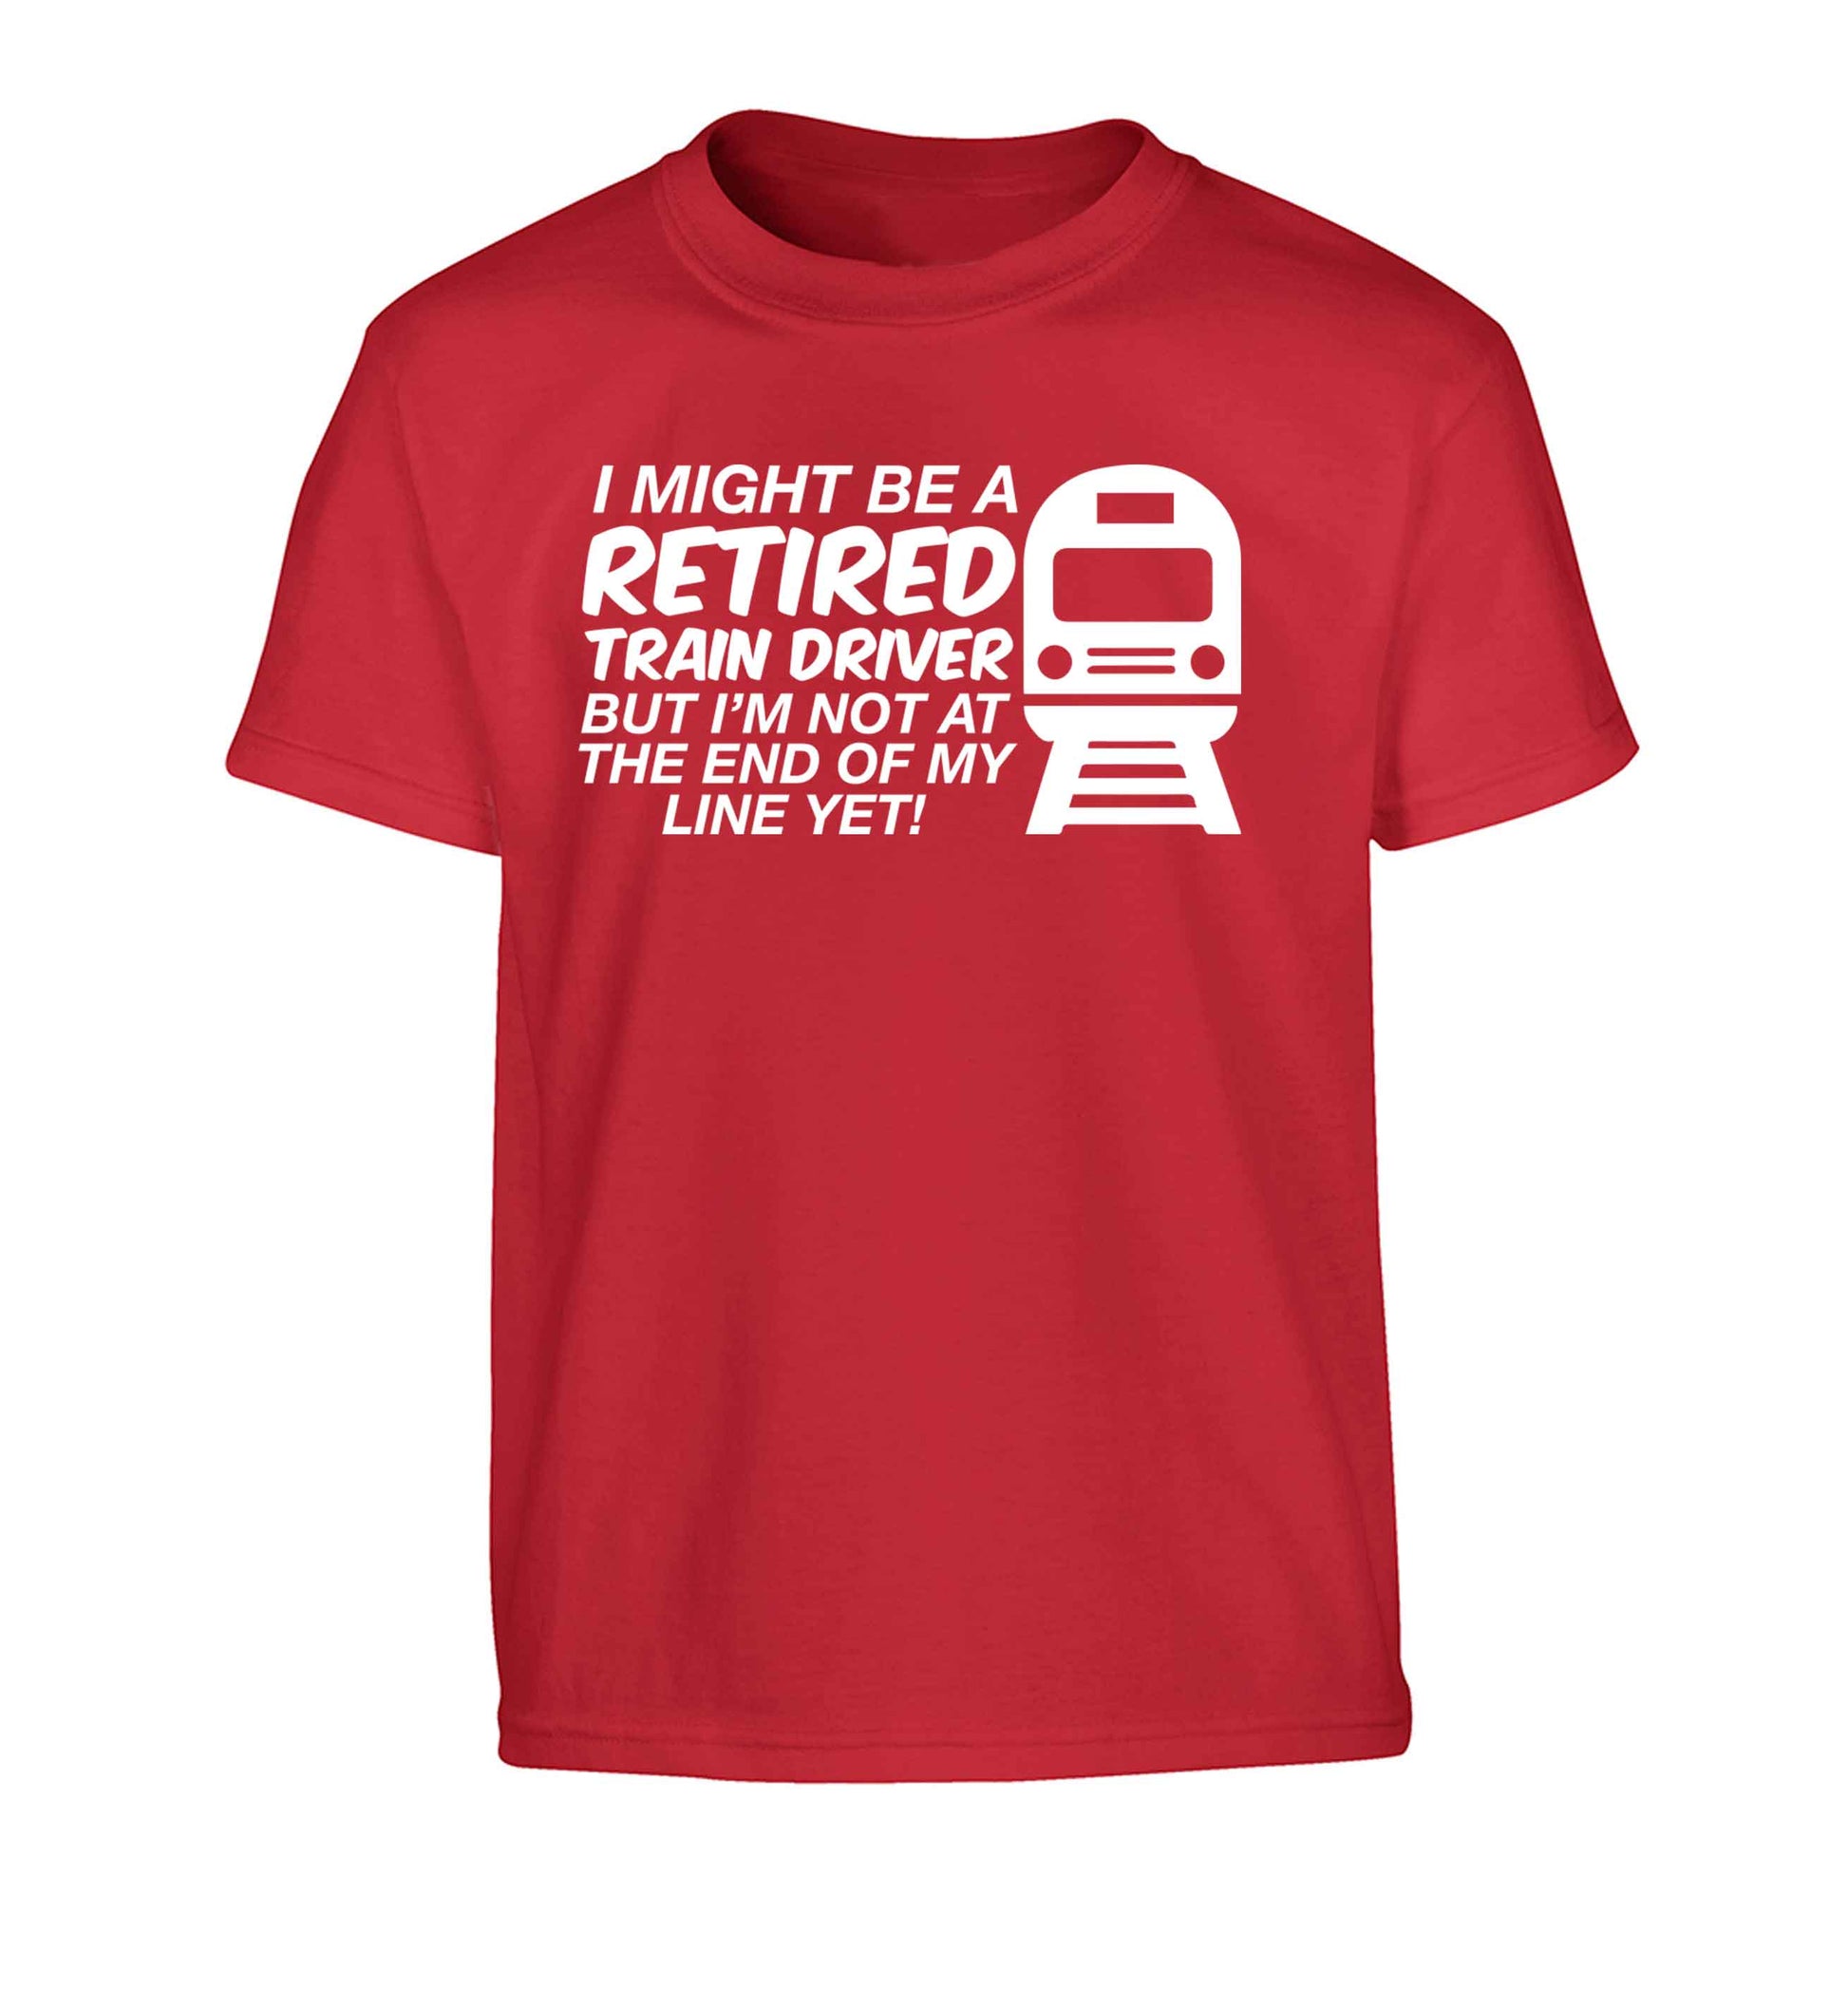 Retired train driver but I'm not at the end of my line yet Children's red Tshirt 12-13 Years